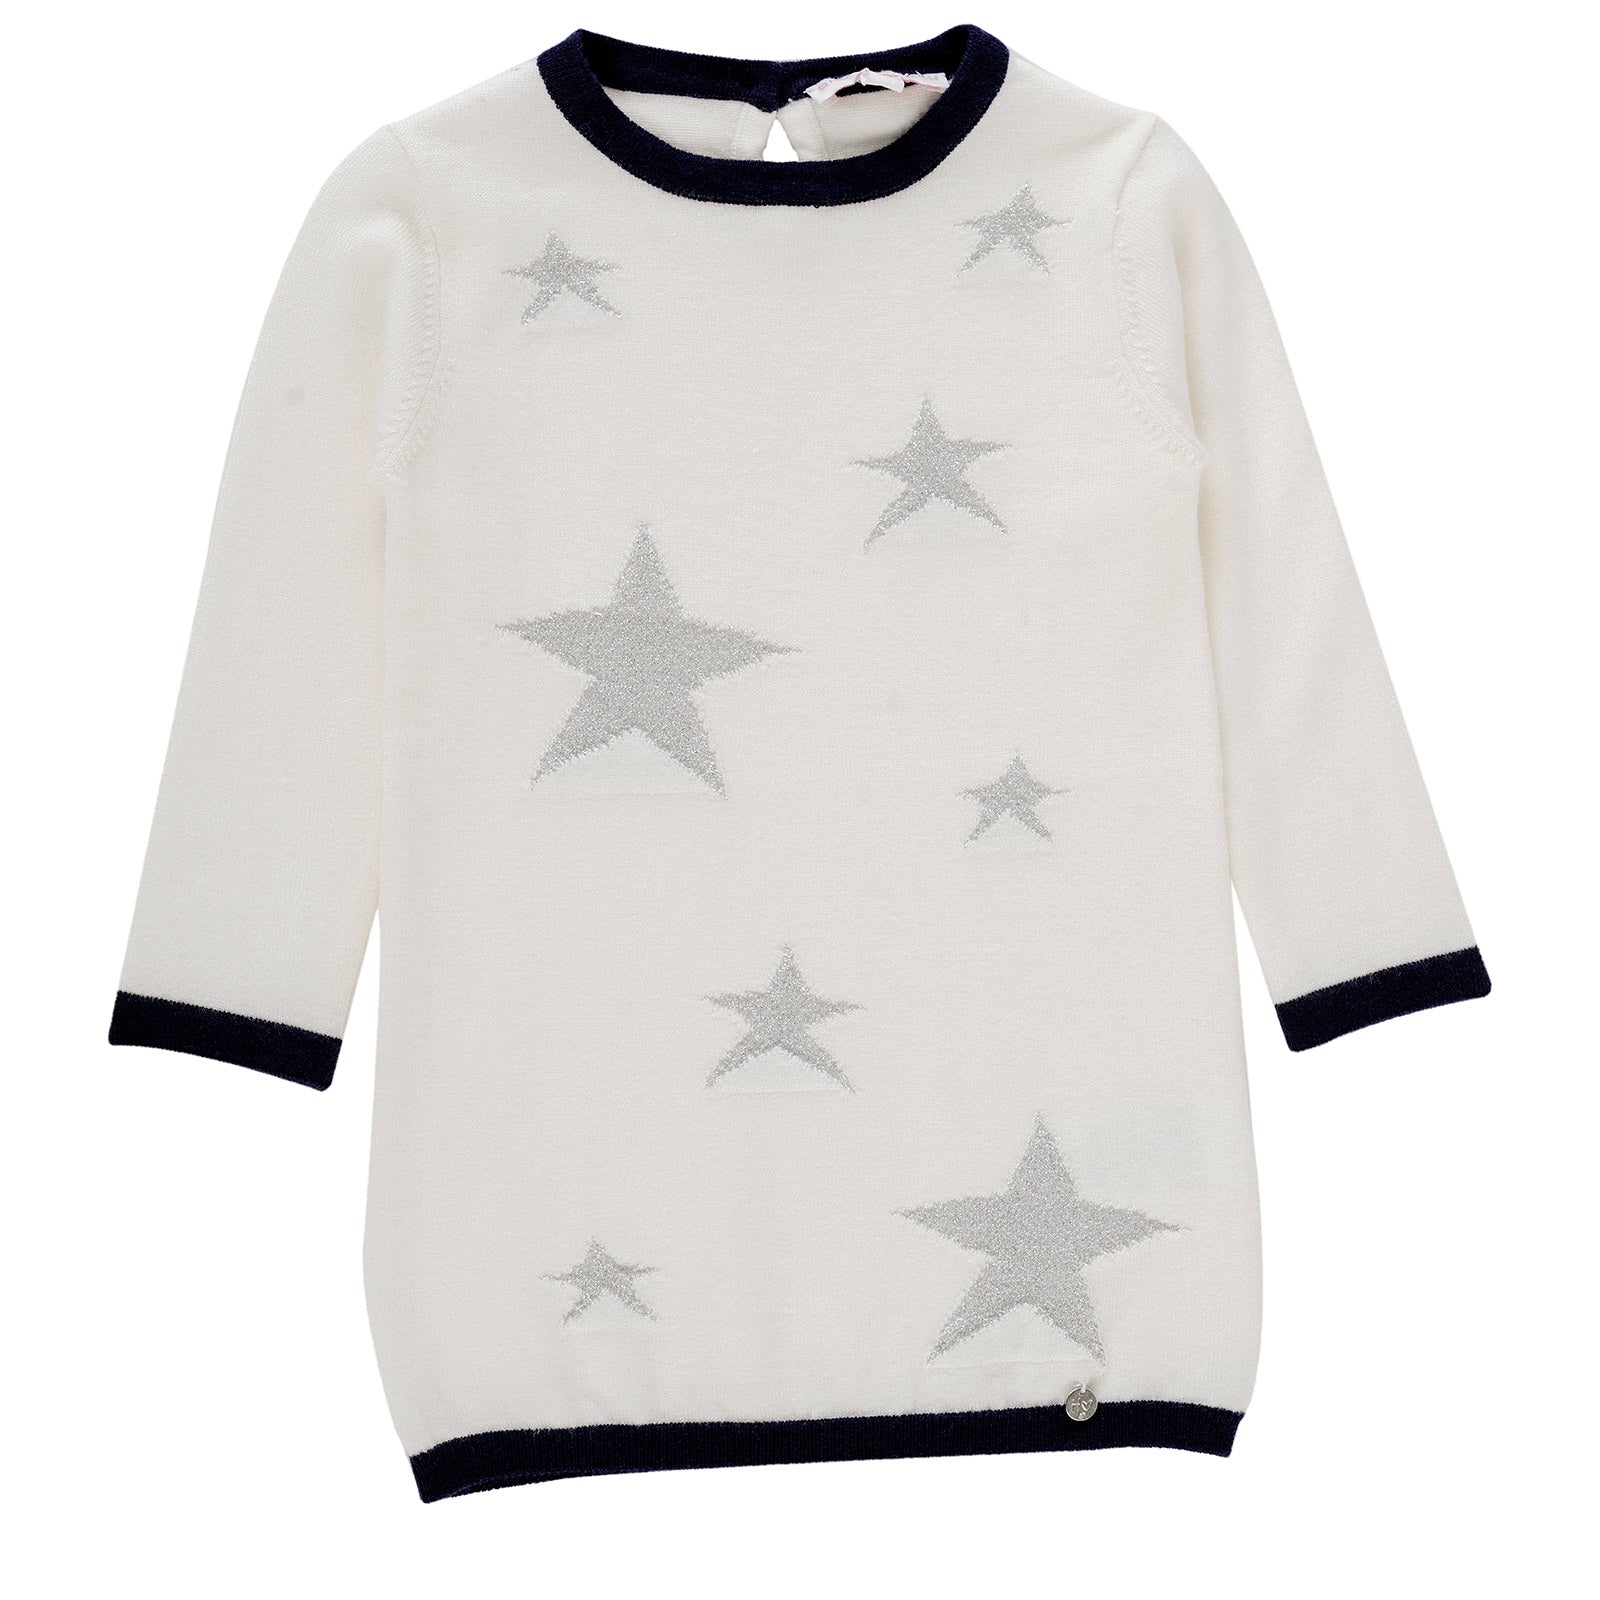 
  Little dress from the Silvian Heach Kids clothing line, knitted, with pattern
  stars in lurex...